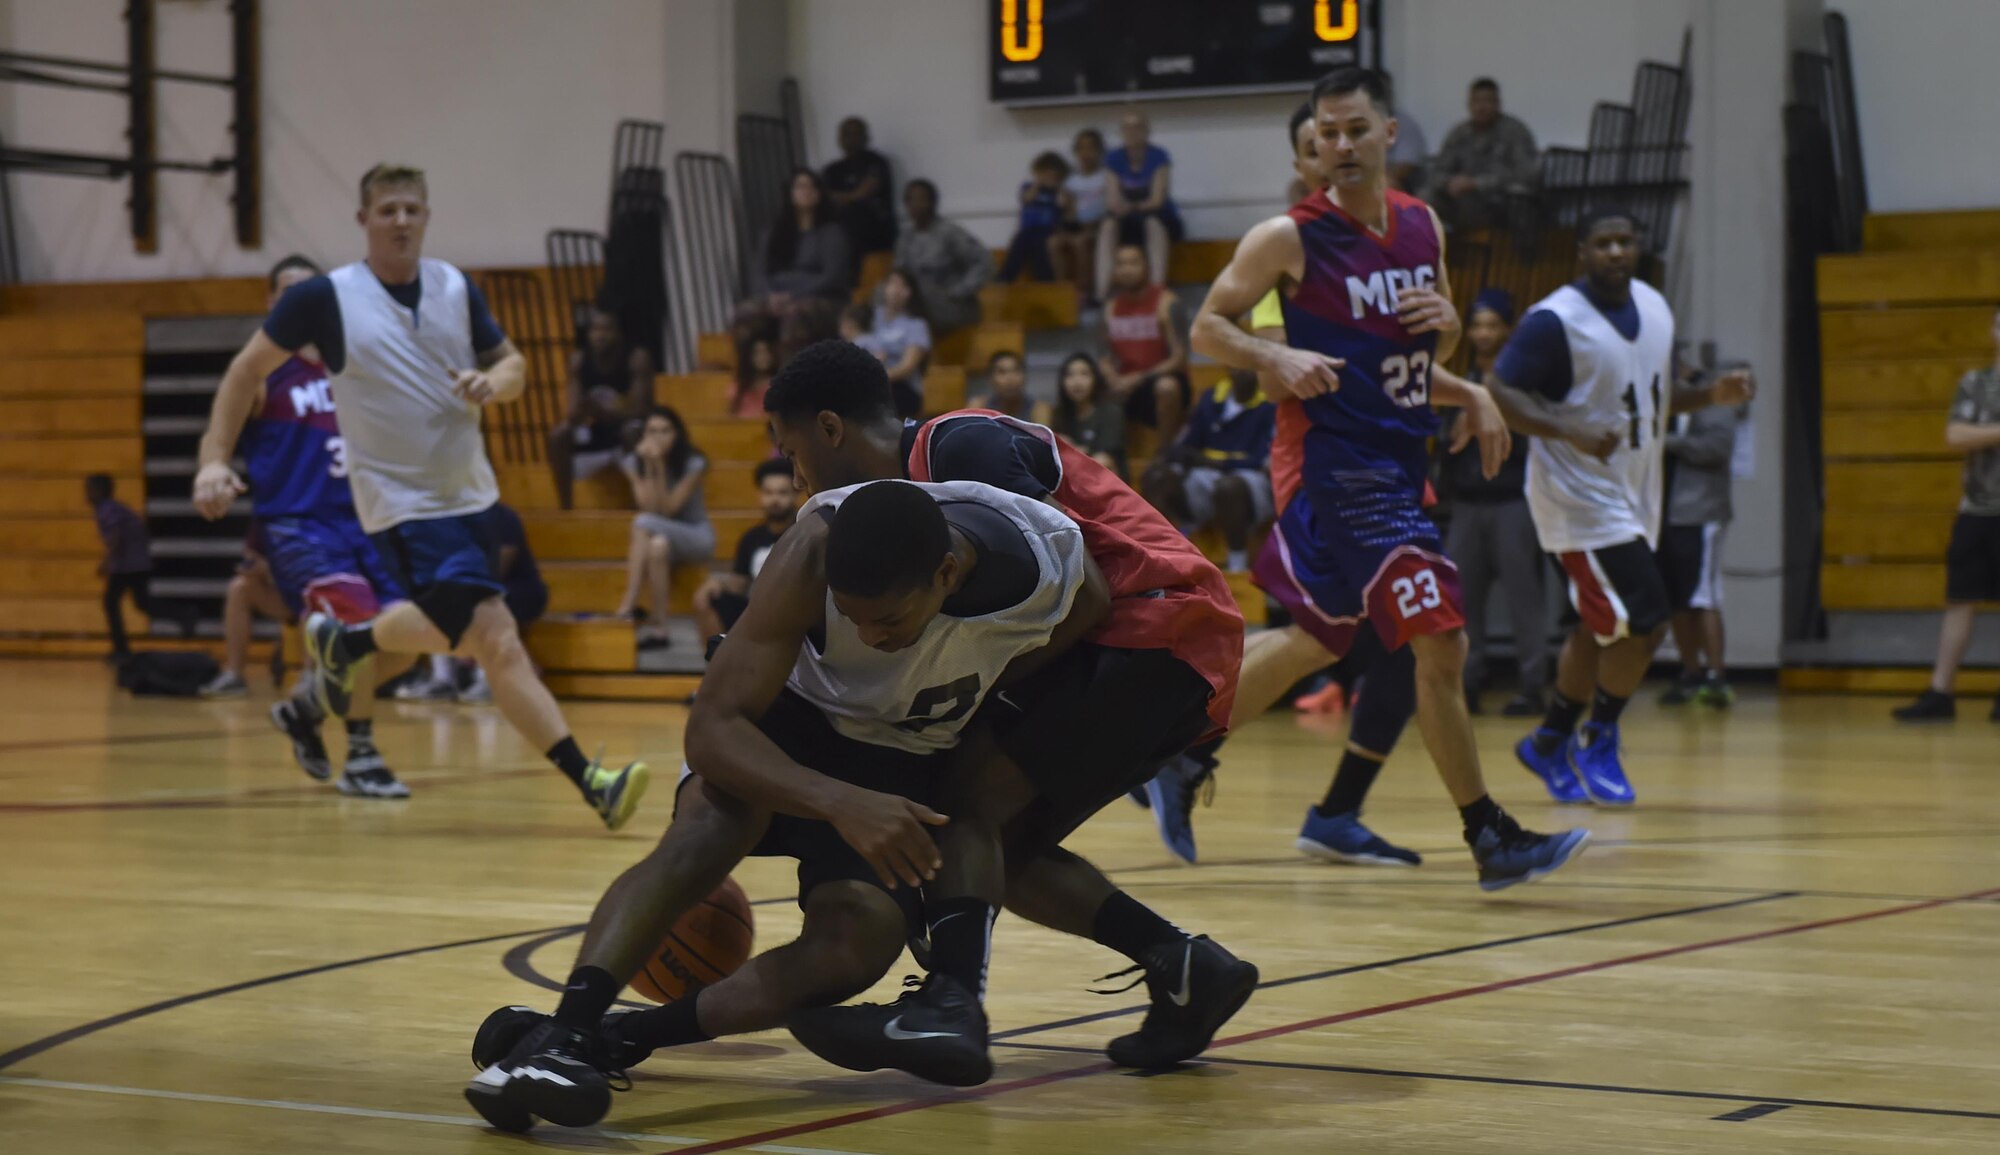 Eric Flowers, a member of the 1st Special Operations Civil Engineer Squadron basketball team, collides with a member of the 1st Special Operations Medical Group basketball team, during the intramural basketball championship at the Aderholt Fitness Center on Hurlburt Field, Fla., April 6, 2017. For eight weeks, 12 teams competed through a single-elimination tournament to qualify for the championship game. (U.S. Air Force photo by Airman 1st Class Joseph Pick)